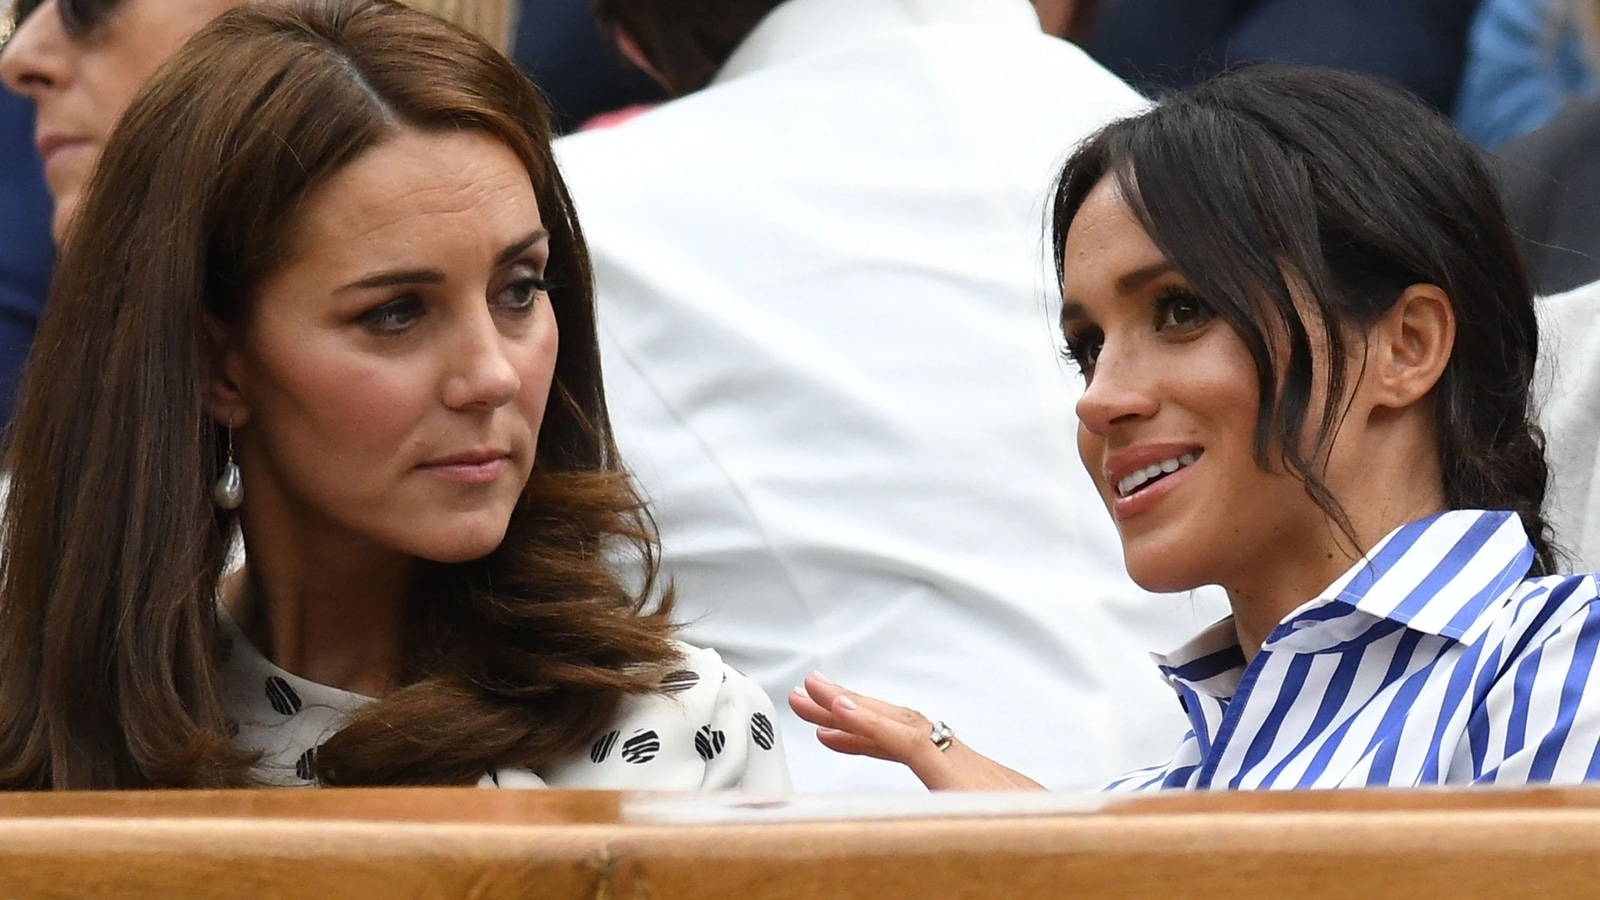 When did Meghan Markle and Kate Middleton’s bitter feud begin? A report says…